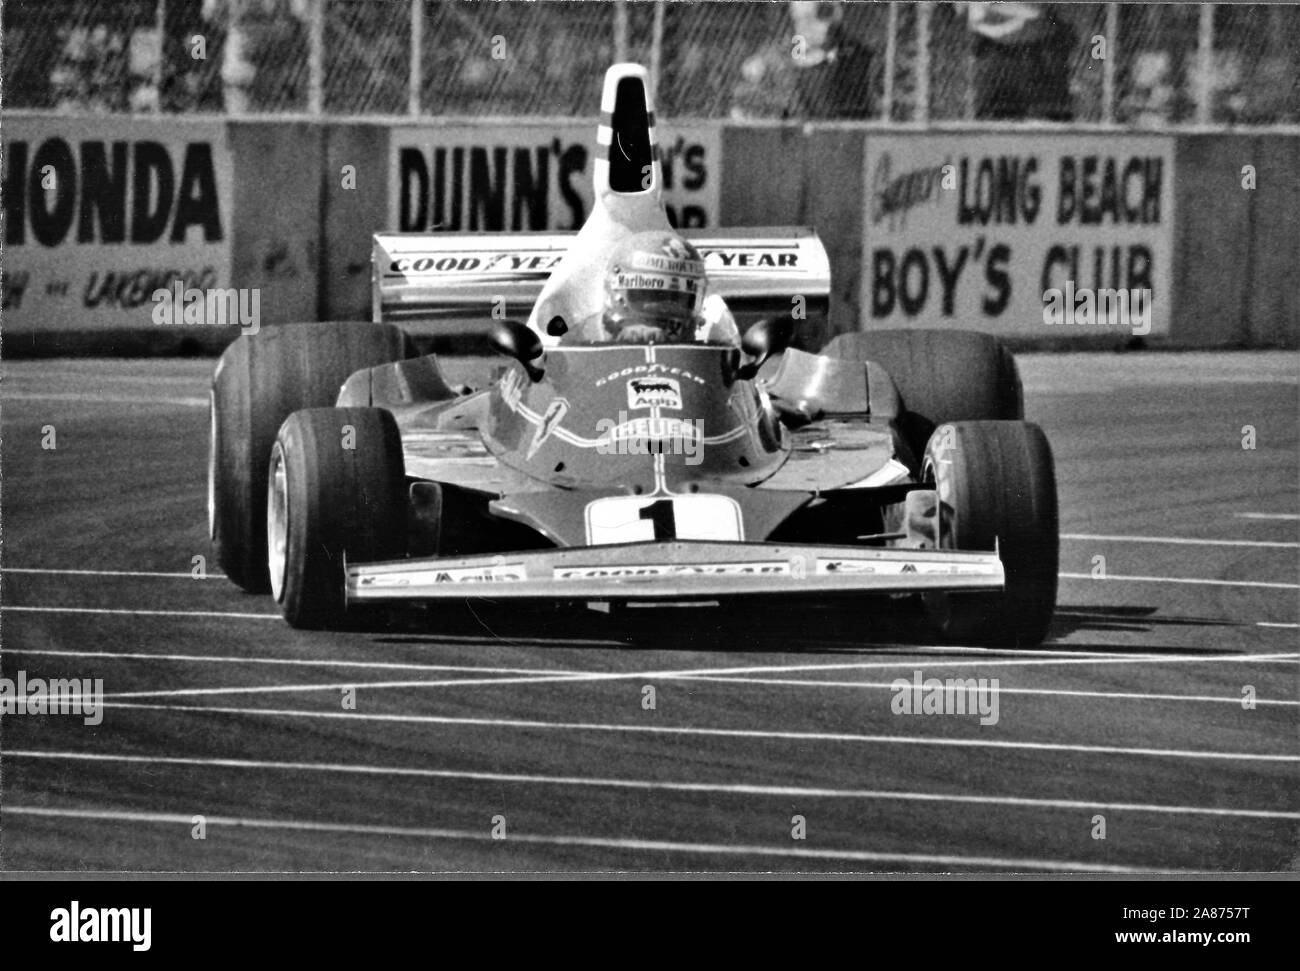 Niki Lauda in his Ferrari 312T2 at the Long Beach Grand Prix - The United States Grand Prix of 1977.   Andreas Nikolaus Lauda was an Austrian Formula One driver, a three-time F1 World Drivers' Champion, winning in 1975, 1977 and 1984, and an aviation entrepreneur. He is the only driver in F1 history to have been champion for both Ferrari and McLaren, the sport's two most successful constructors. 22 February 1949 – 20 May 2019) was an Austrian Formula One driver, a three-time F1 World Drivers' Champion, winning in 1975, 1977 and 1984, and an aviation entrepreneur. He is the only driver in F1 hi Stock Photo